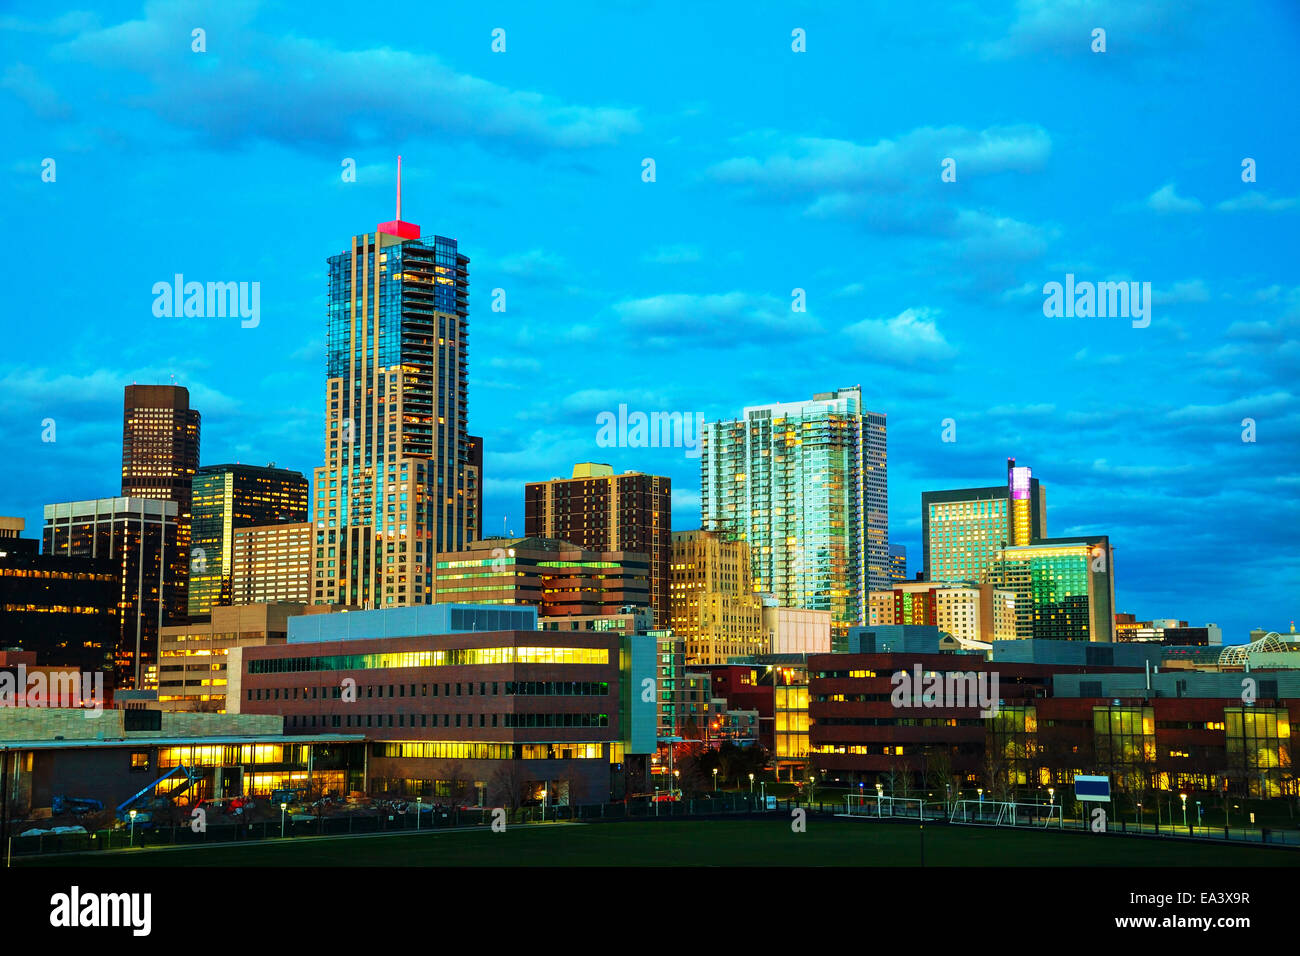 Downtown Denver, Colorado at the night time Stock Photo